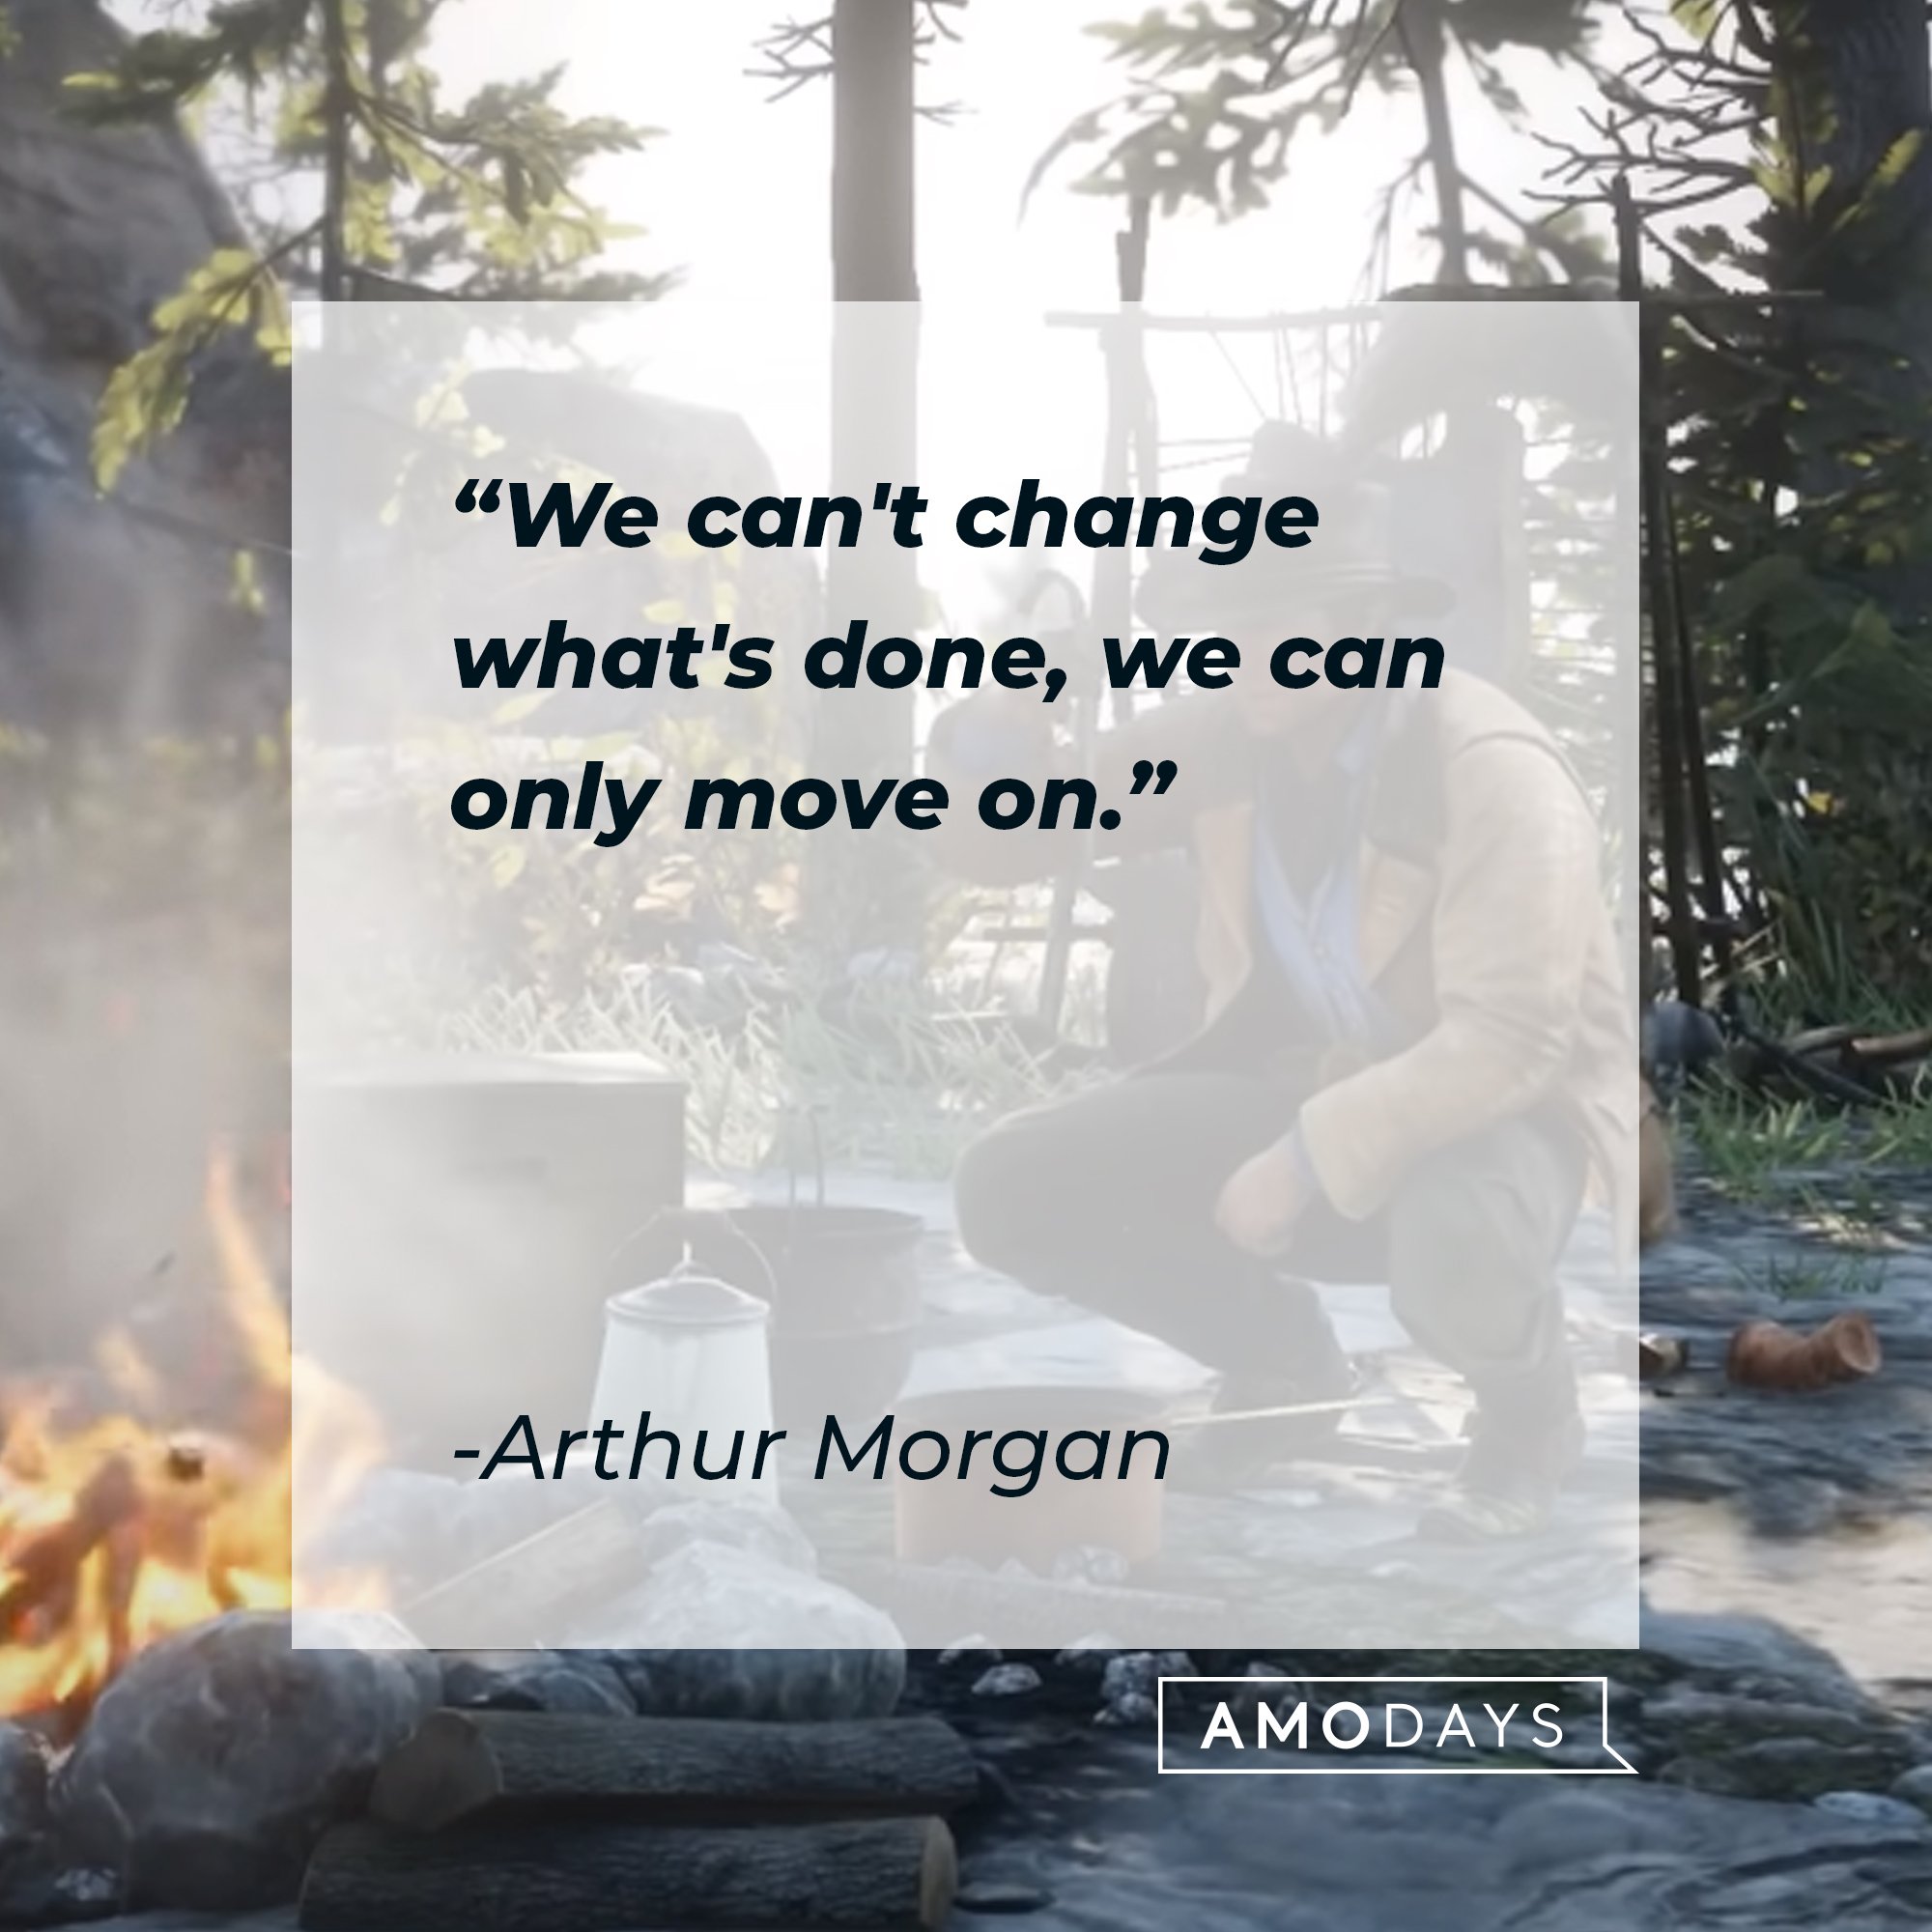 Arthur Morgan's quote: "We can't change what's done, we can only move on." | Image: AmoDays